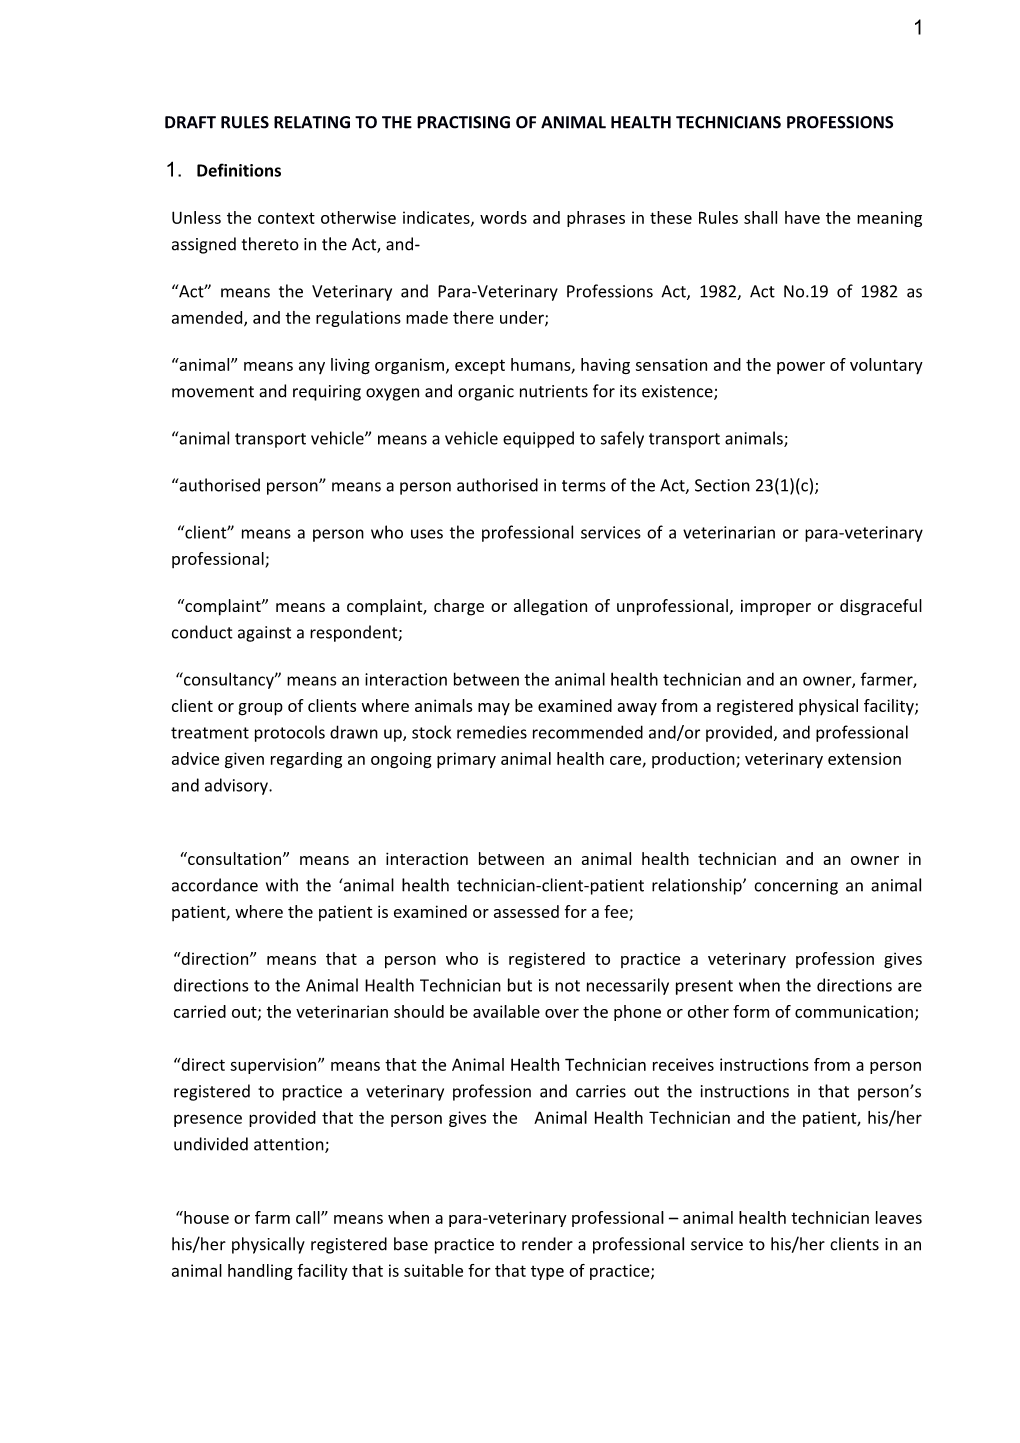 Draft Rules Relating to the Practising of Animal Health Techniciansprofessions